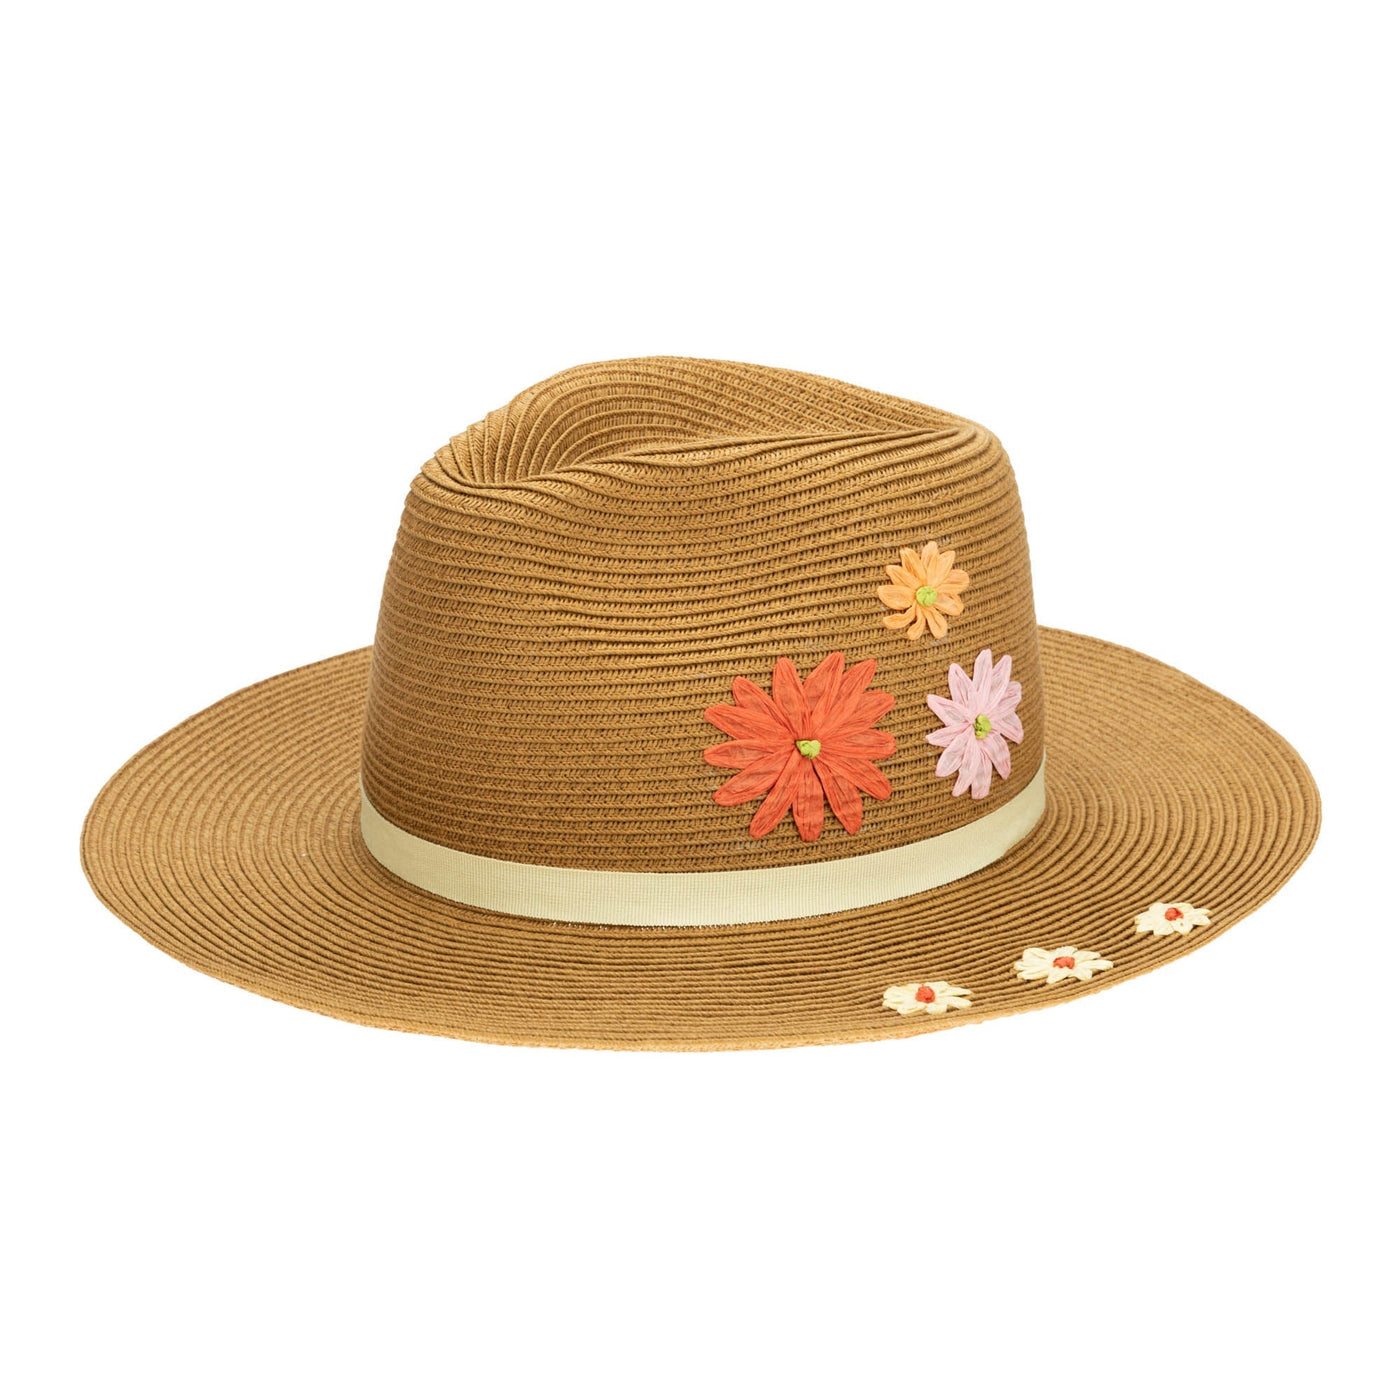 FEDORA - Kids Paperbraid Fedora With Retro Floral Embroidery